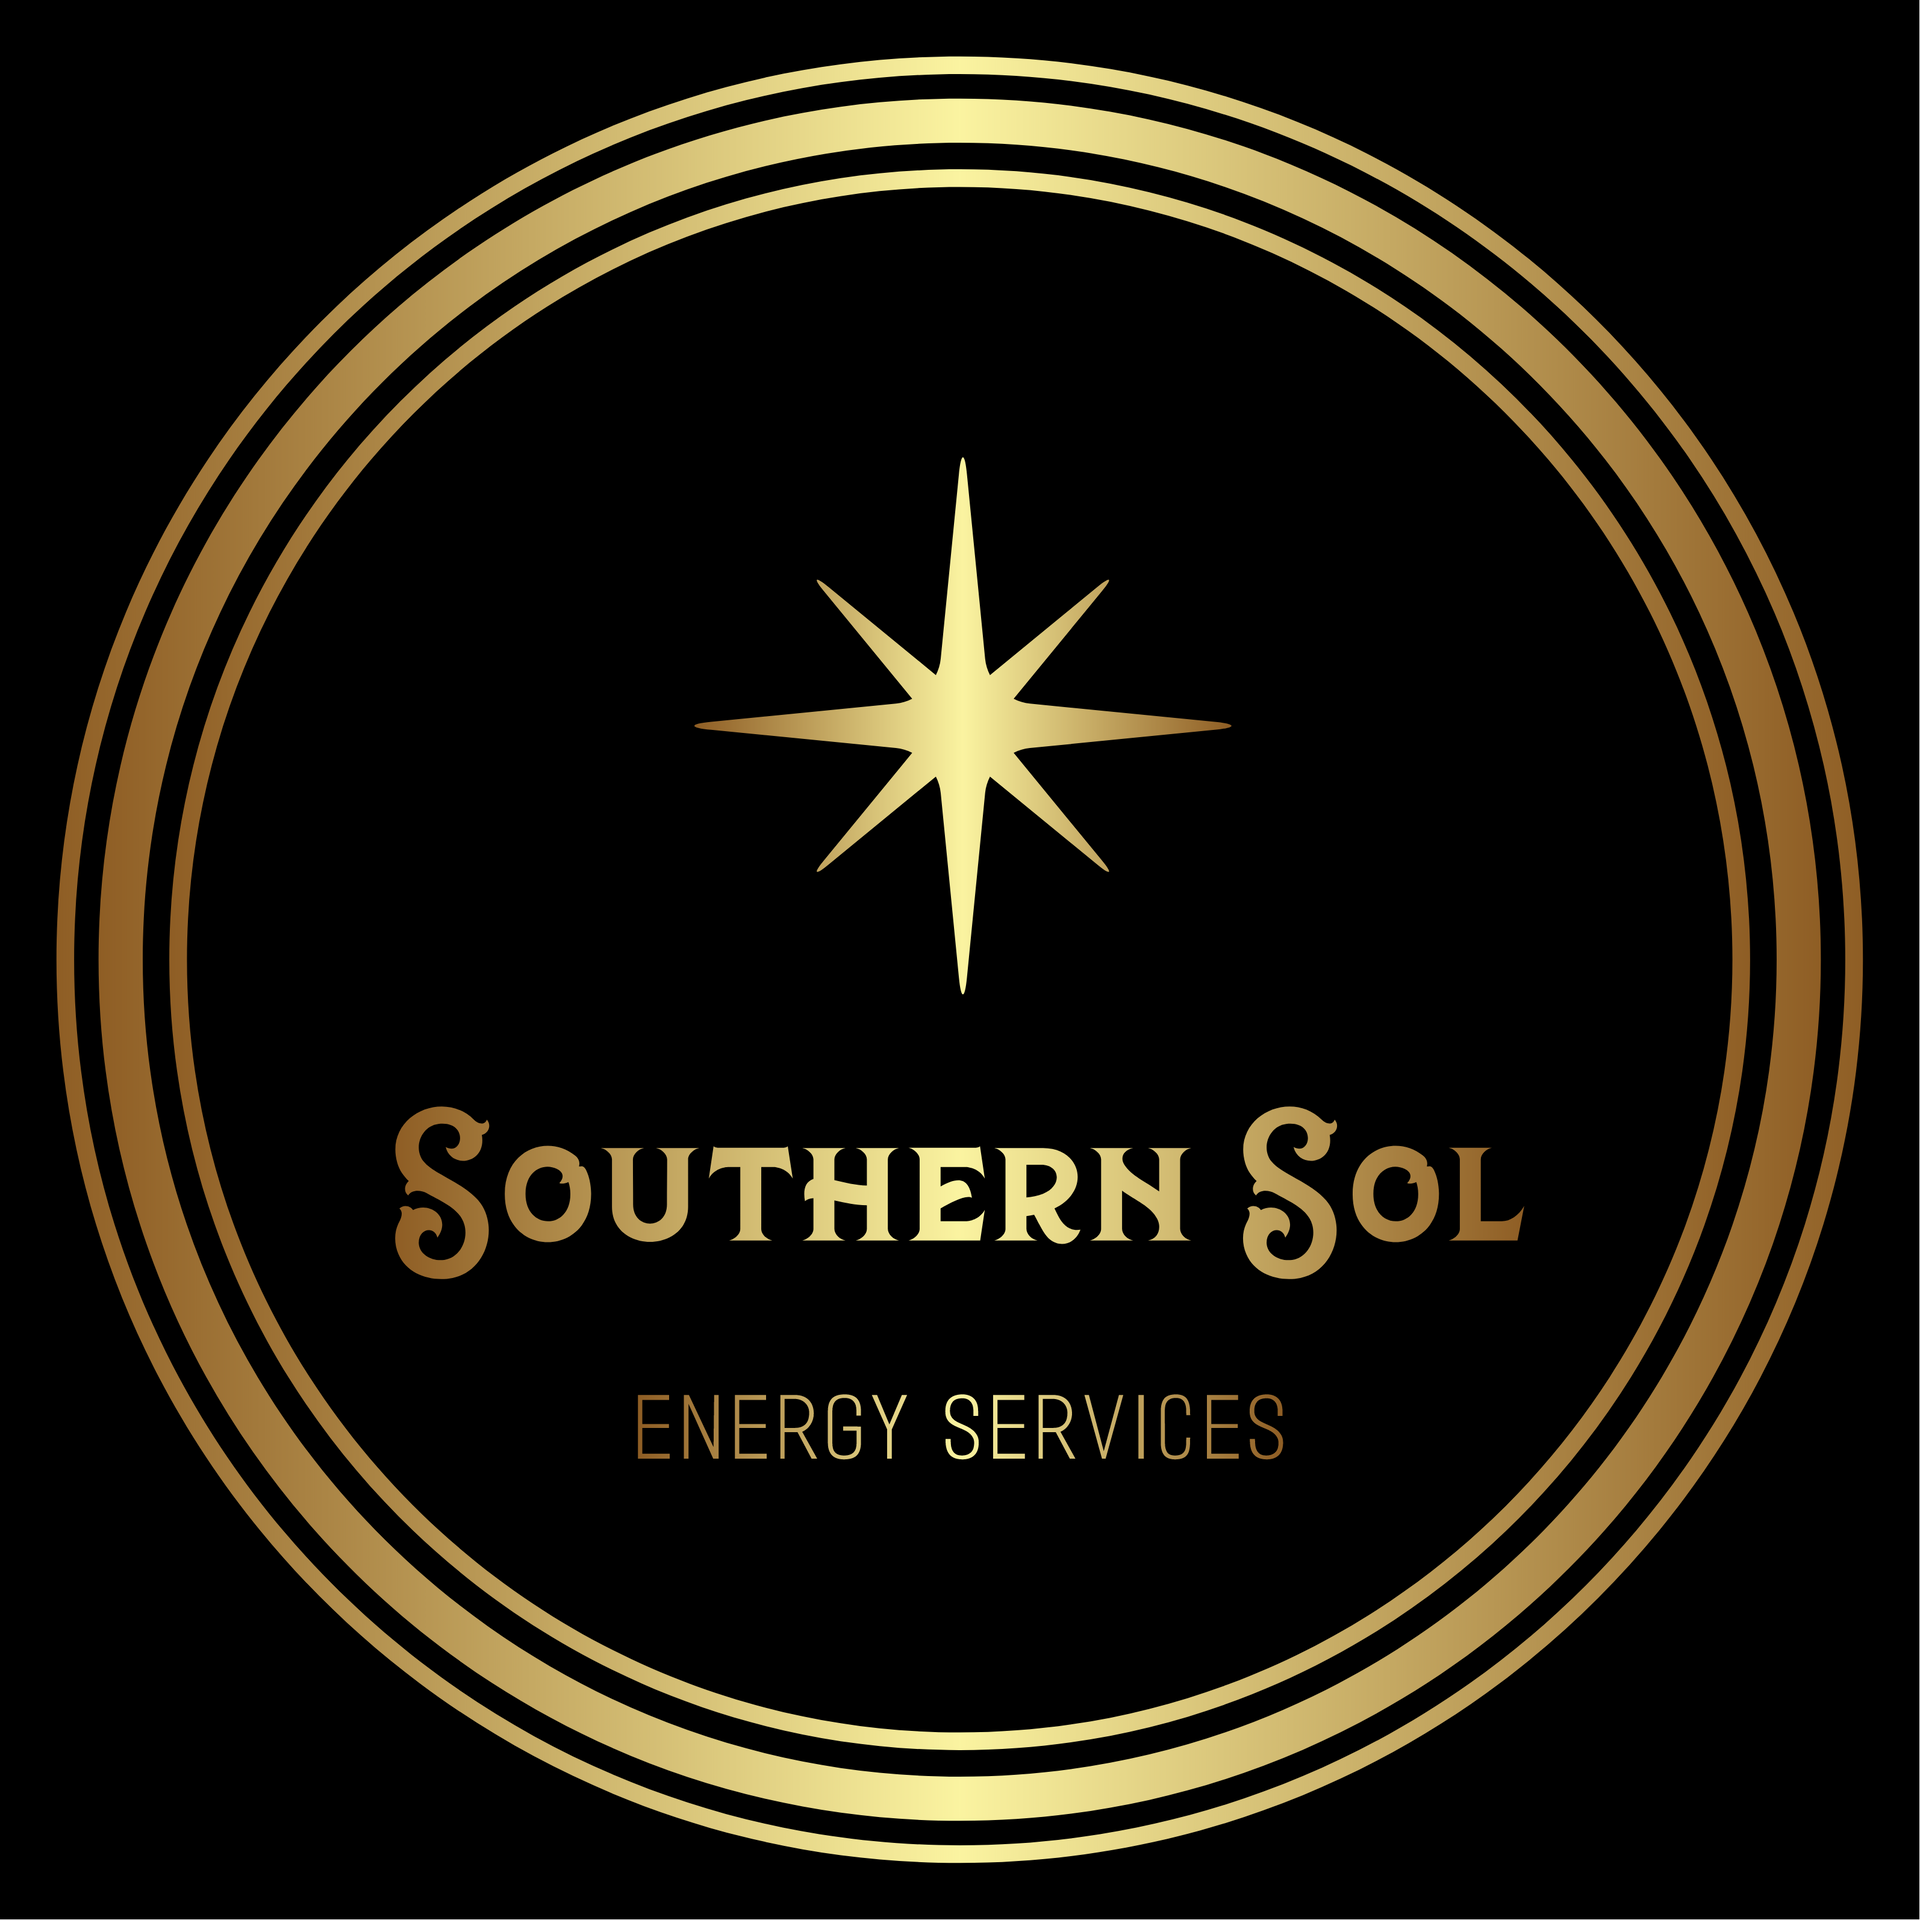 Southern Sol Energy Services